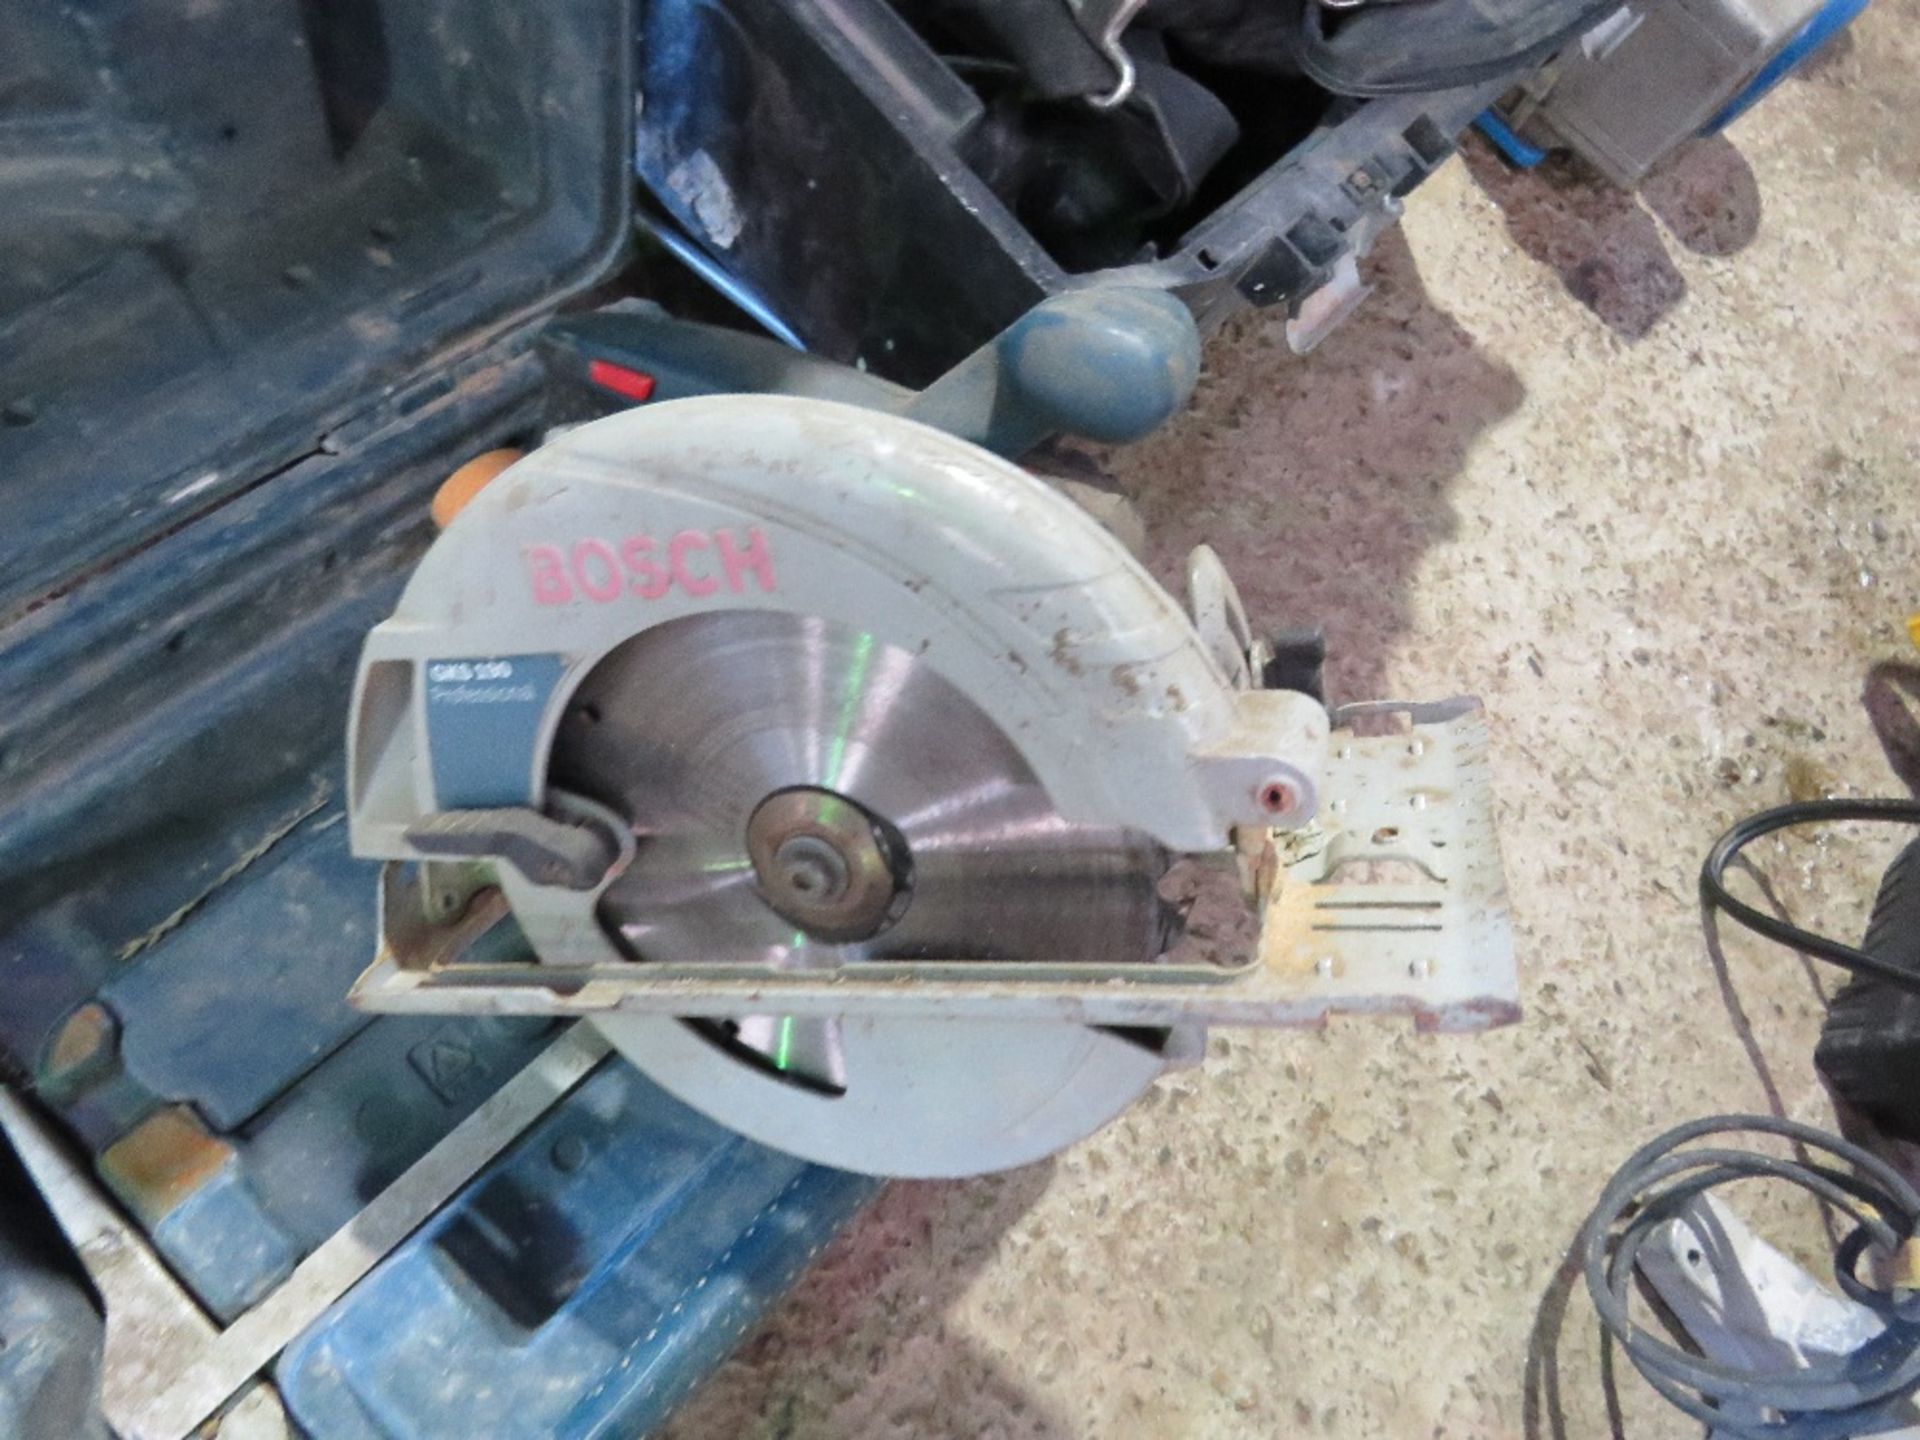 BOSCH 110V CIRCULAR SAW IN A CASE. - Image 2 of 3